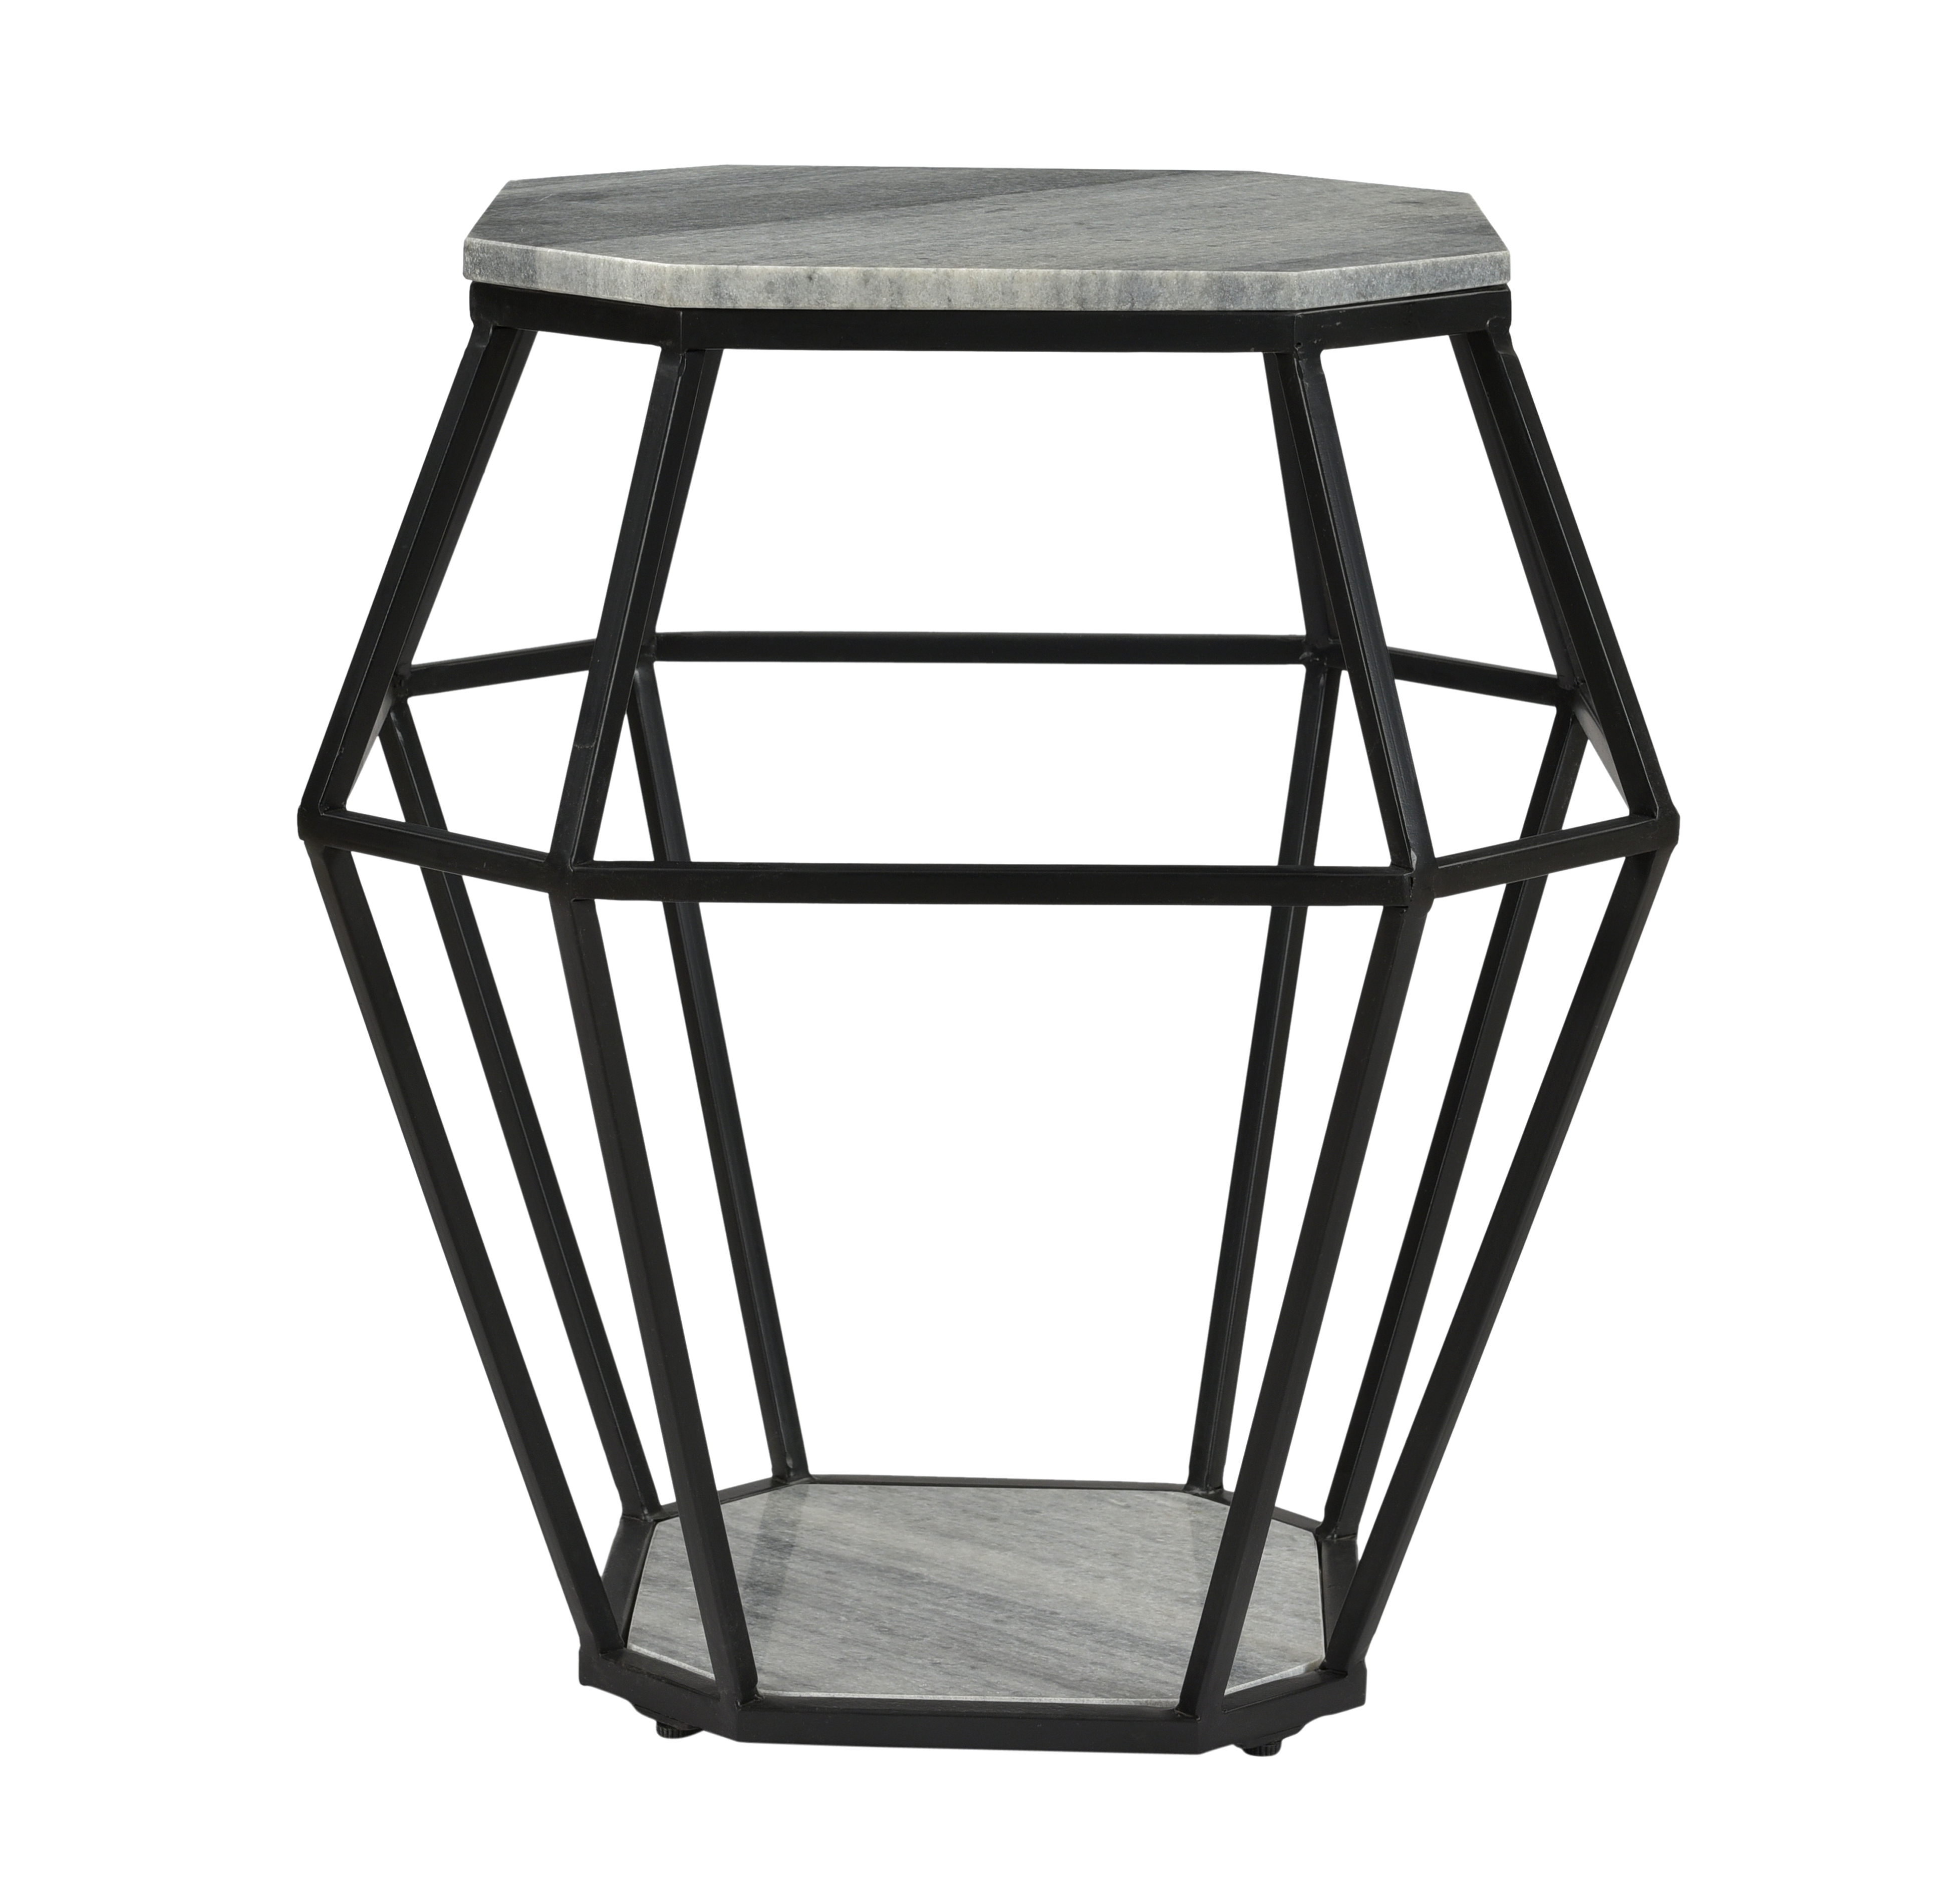 Octagonal Accent Table - Whispy Grey Marble & Black Powder Coat - Image 2